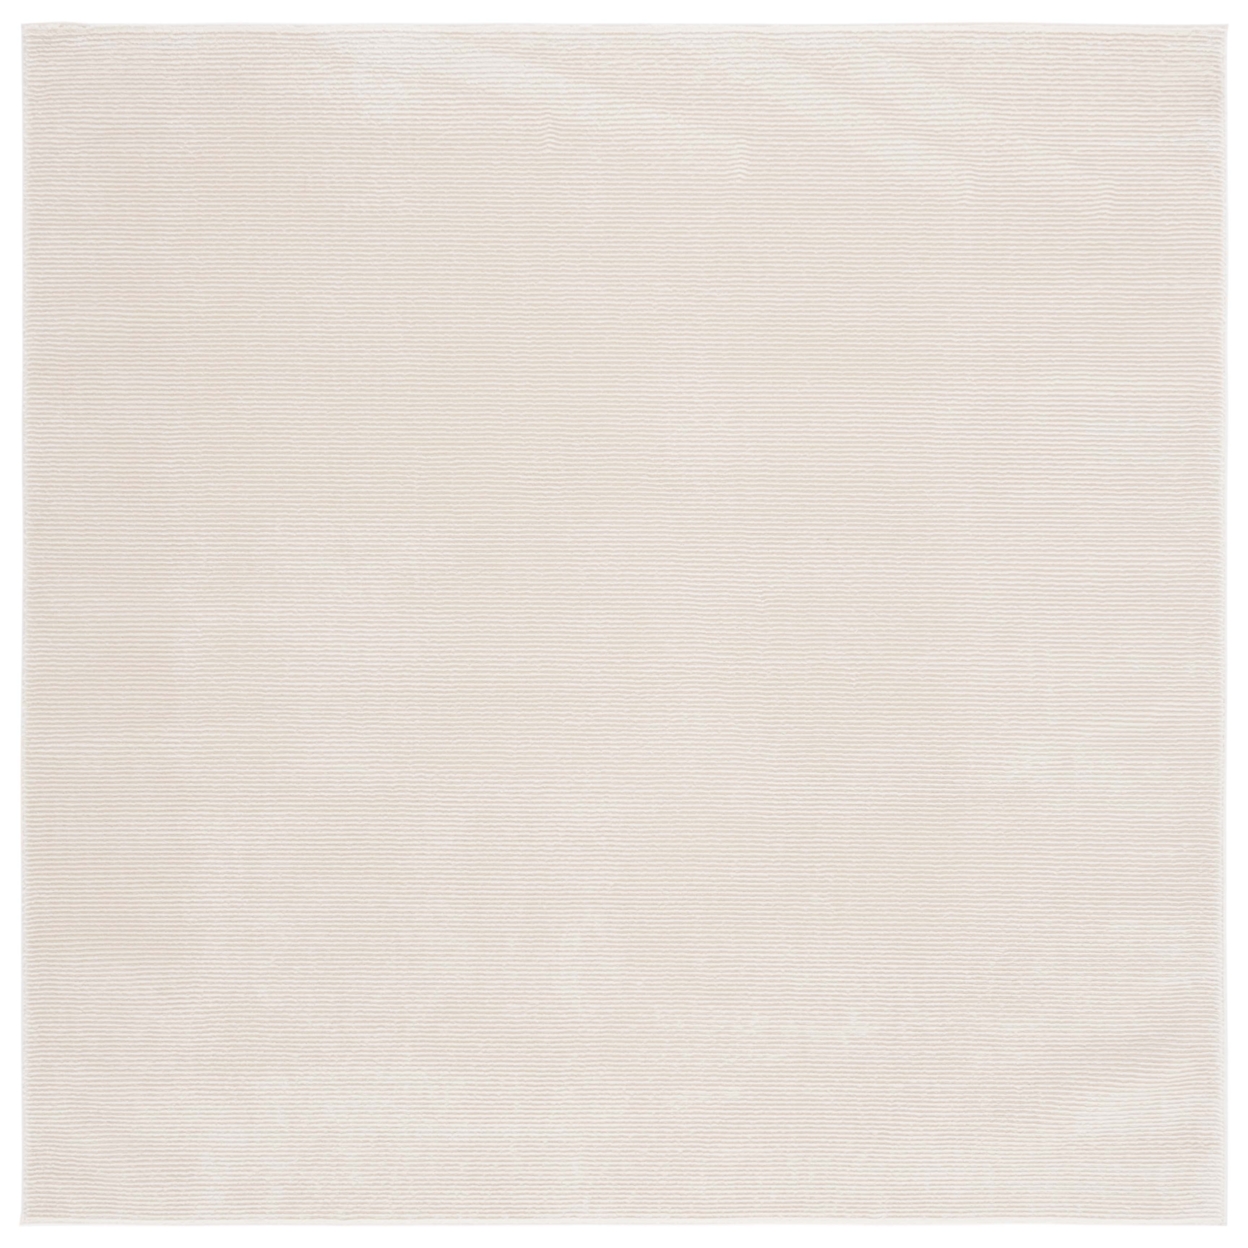 SAFAVIEH REV102A Revive Ivory - Taupe, 8' X 10' Rectangle